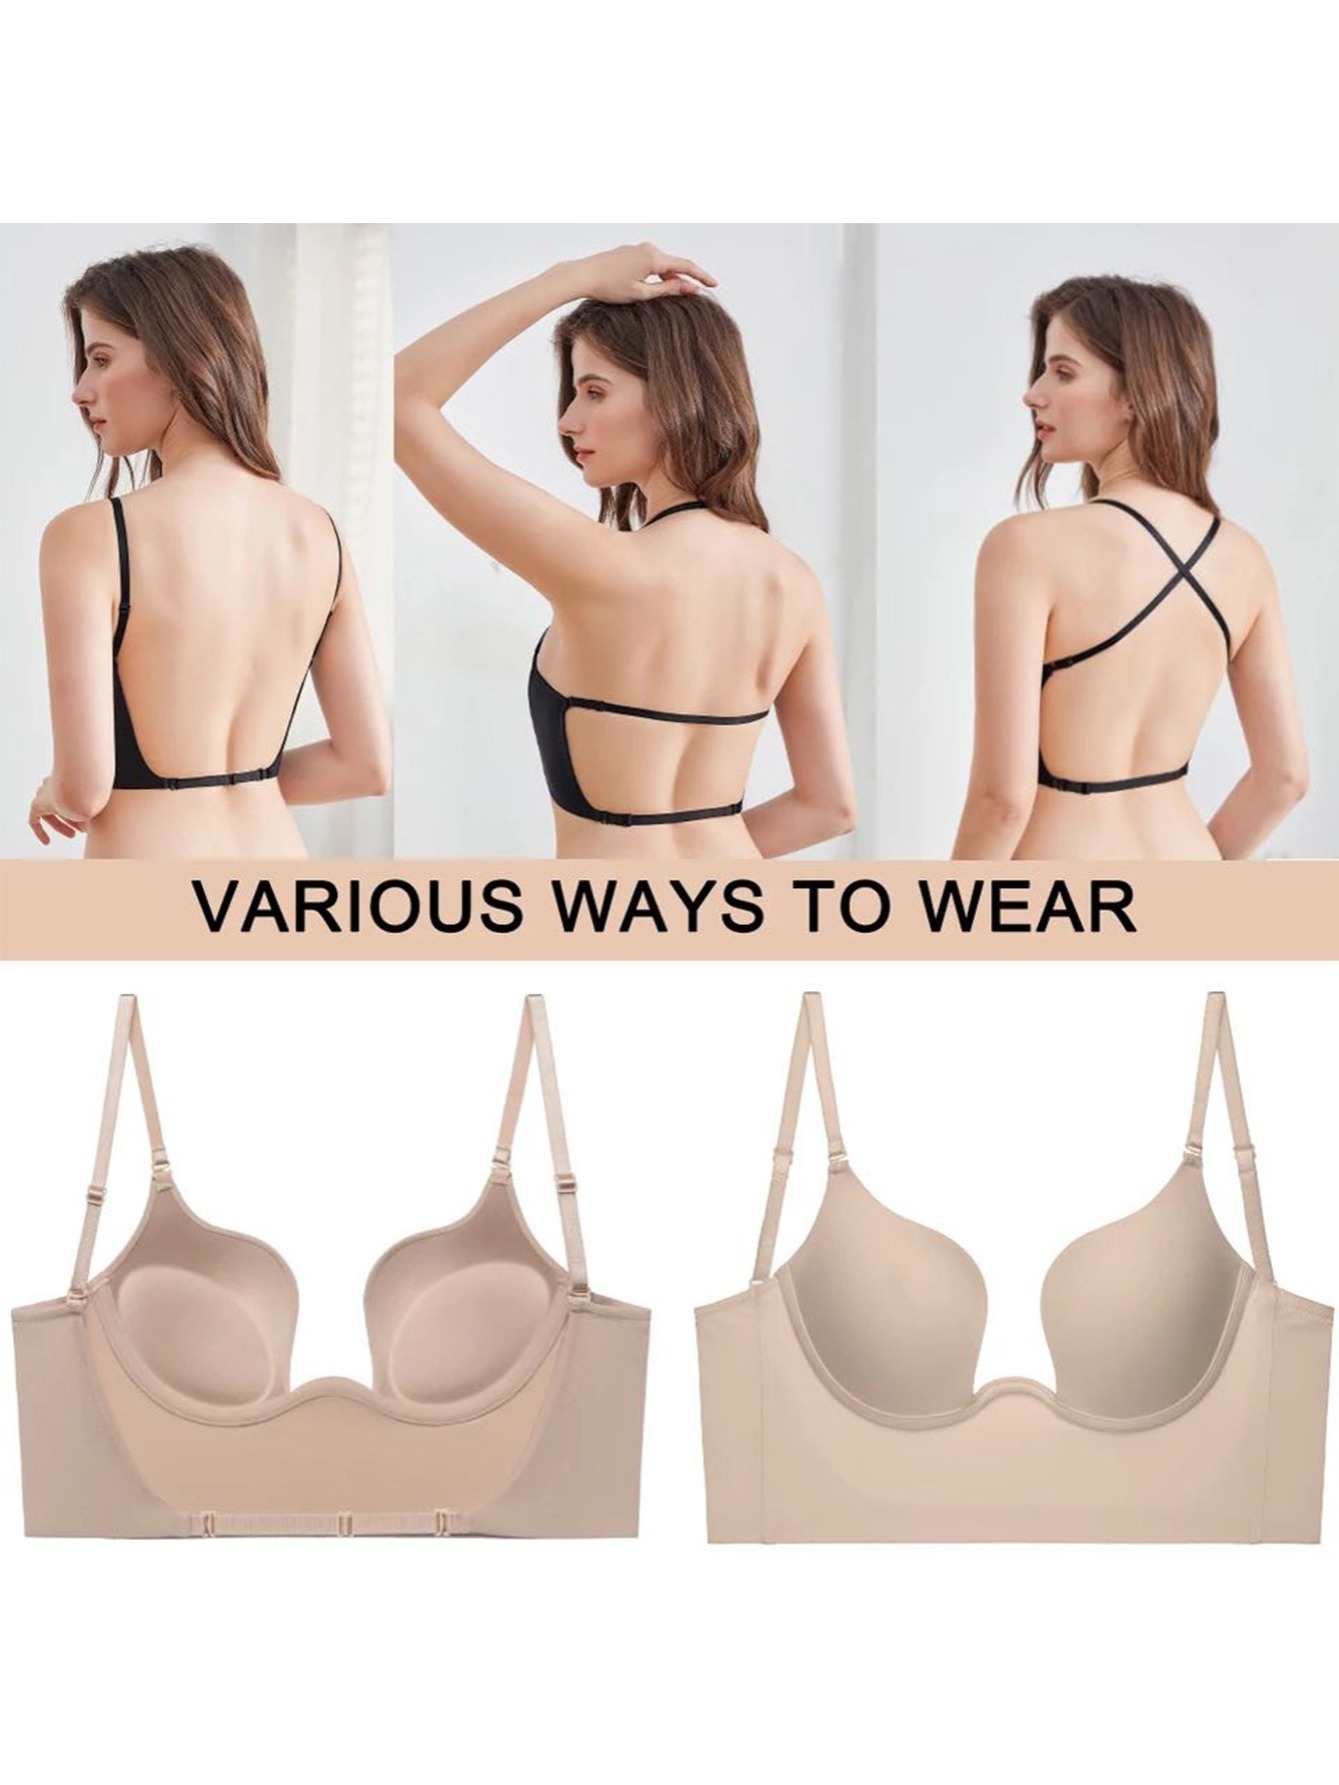 Low Back Bras For Women - Seamless Wire Free Bralette Backless